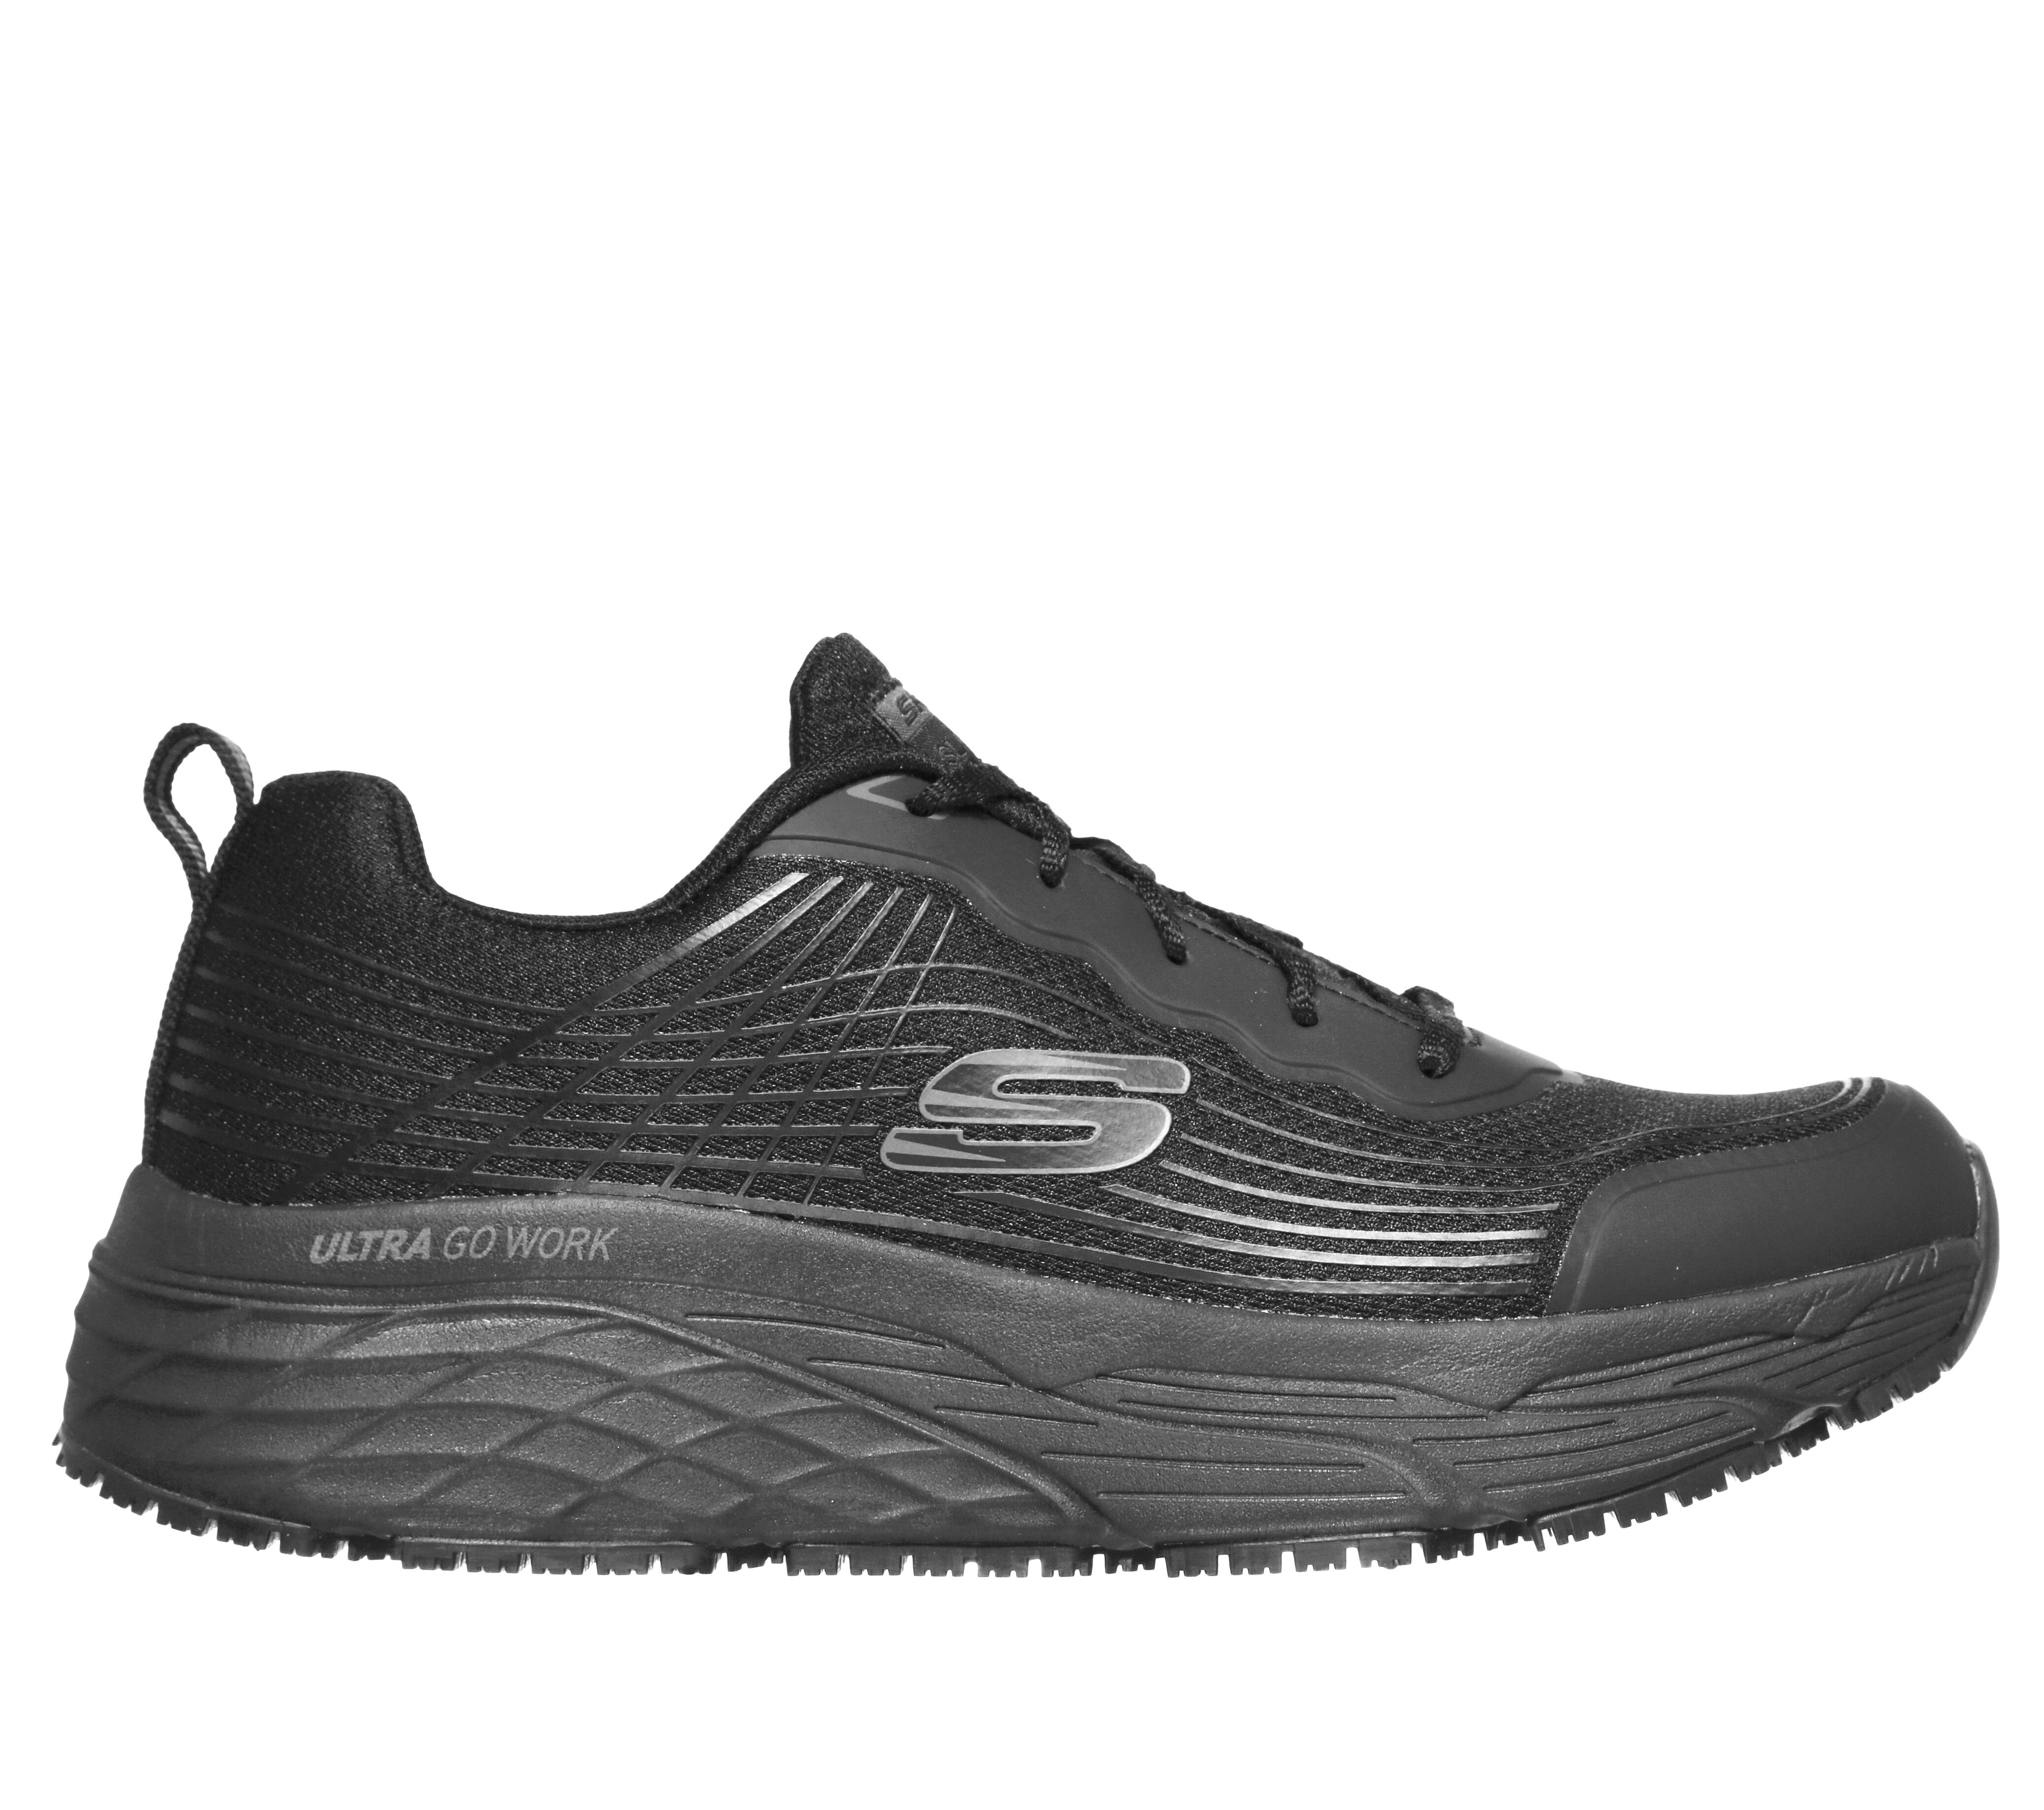 show me skechers work shoes